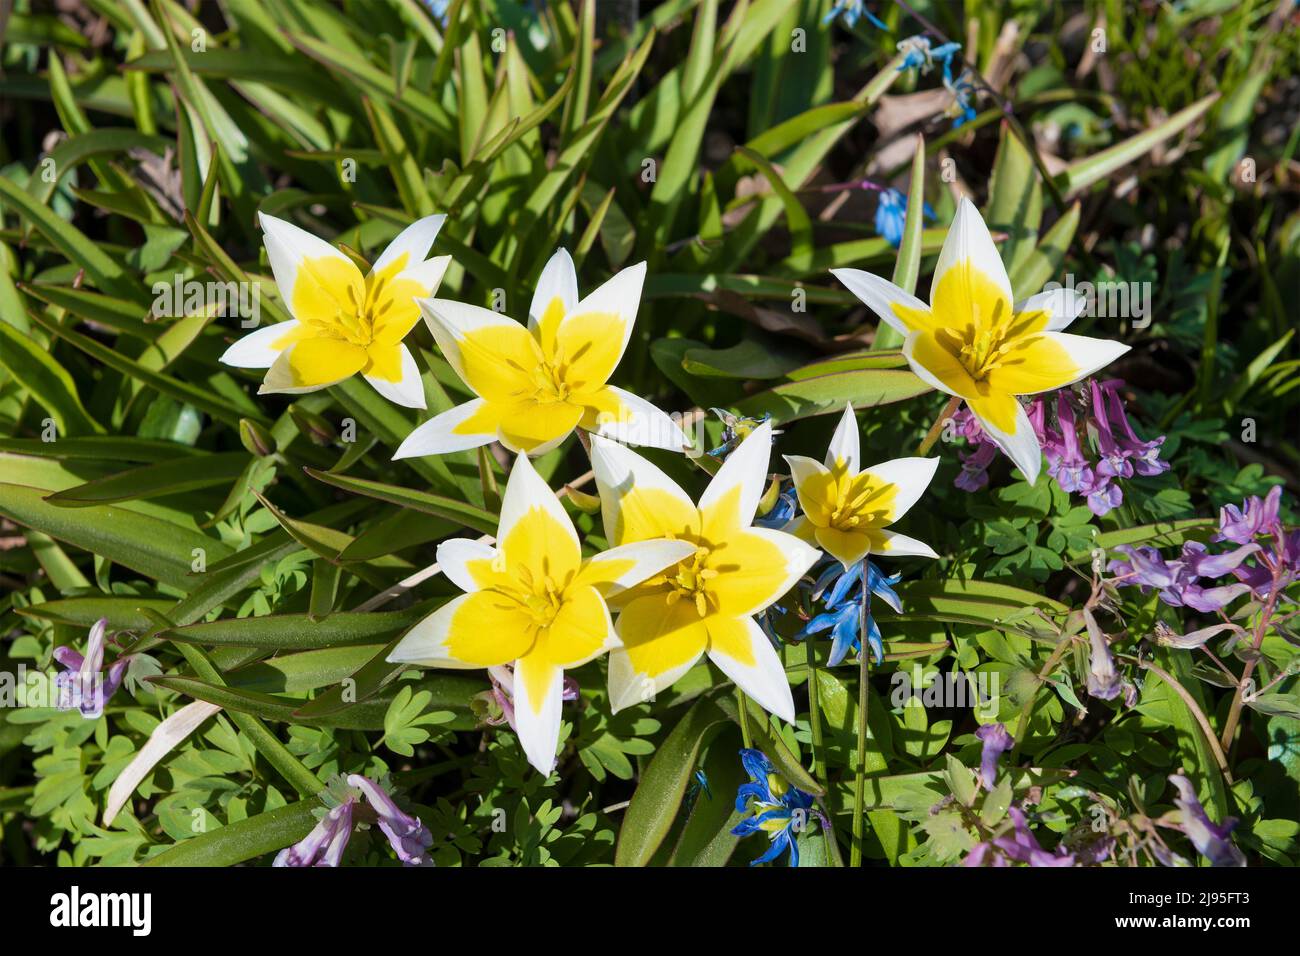 Tulipa tarda flowers on a flowerbed on a sunny spring day Stock Photo